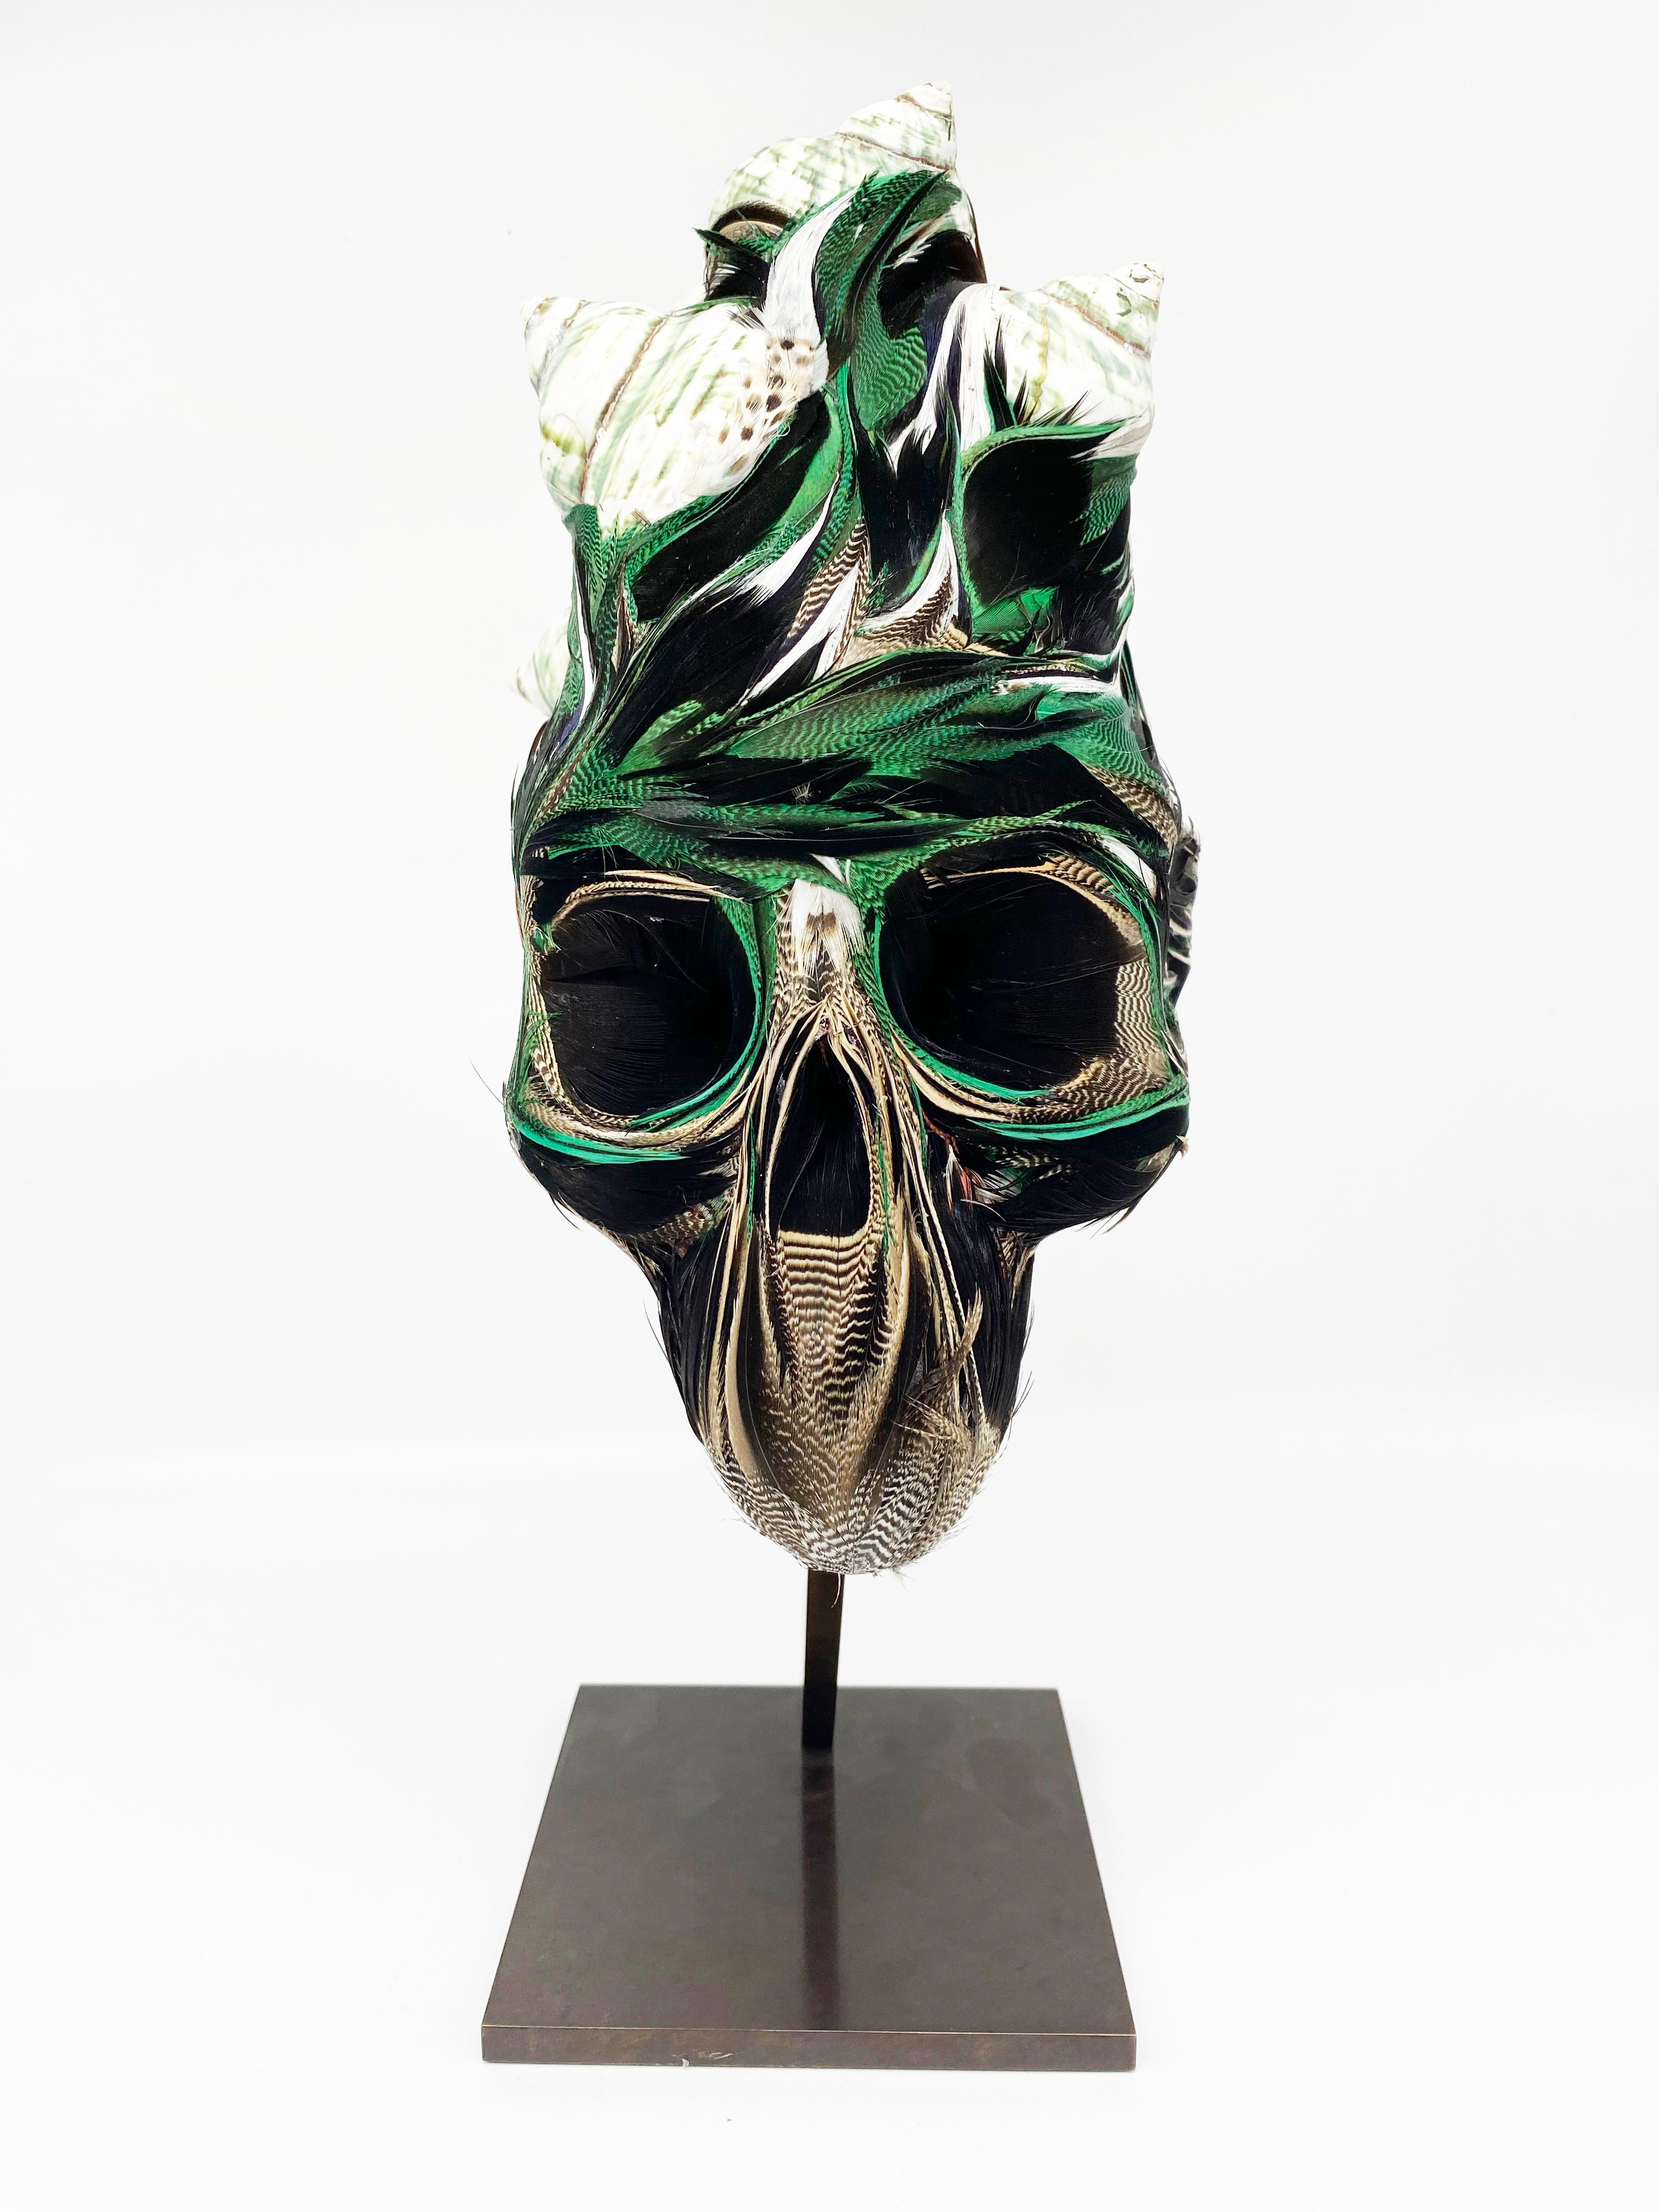 Laurence Le Constant Figurative Sculpture - Kiko, Skull, Recycled feathers and Nocibe shells on resin, base in brass